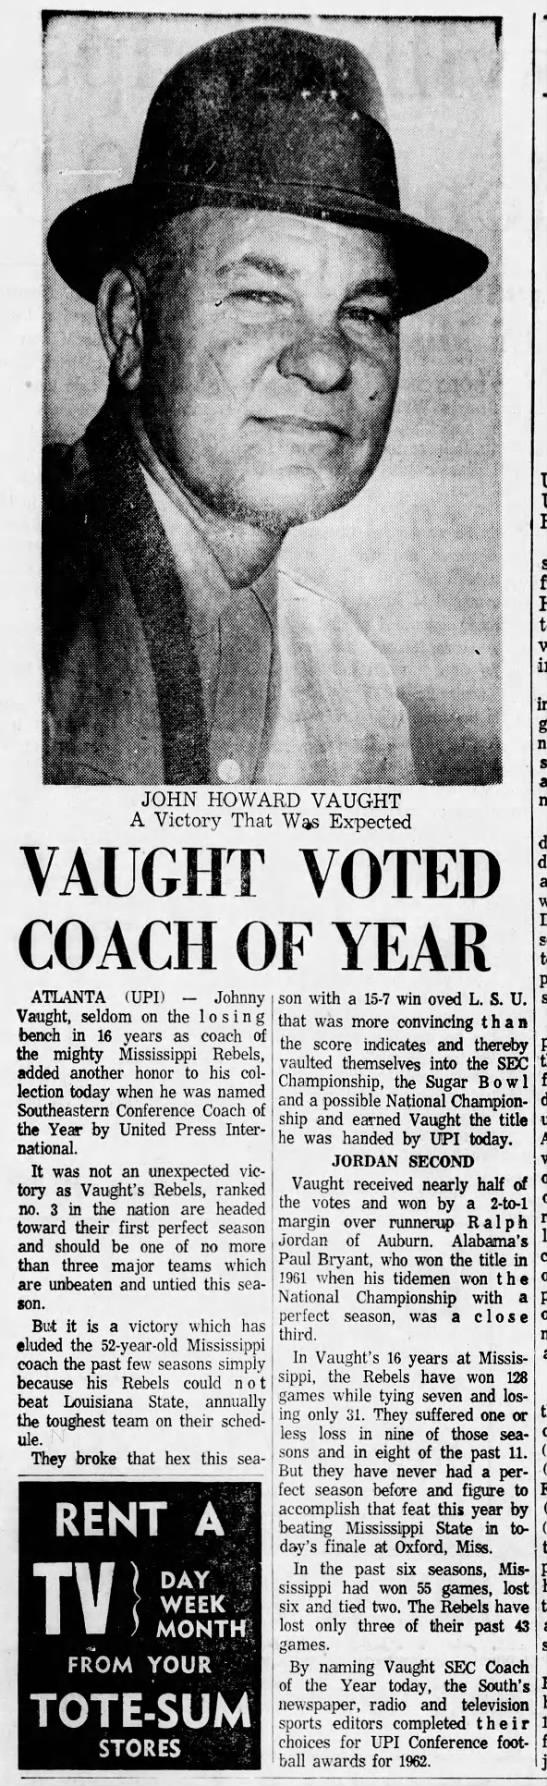 Vaught Voted Coach of Year - 